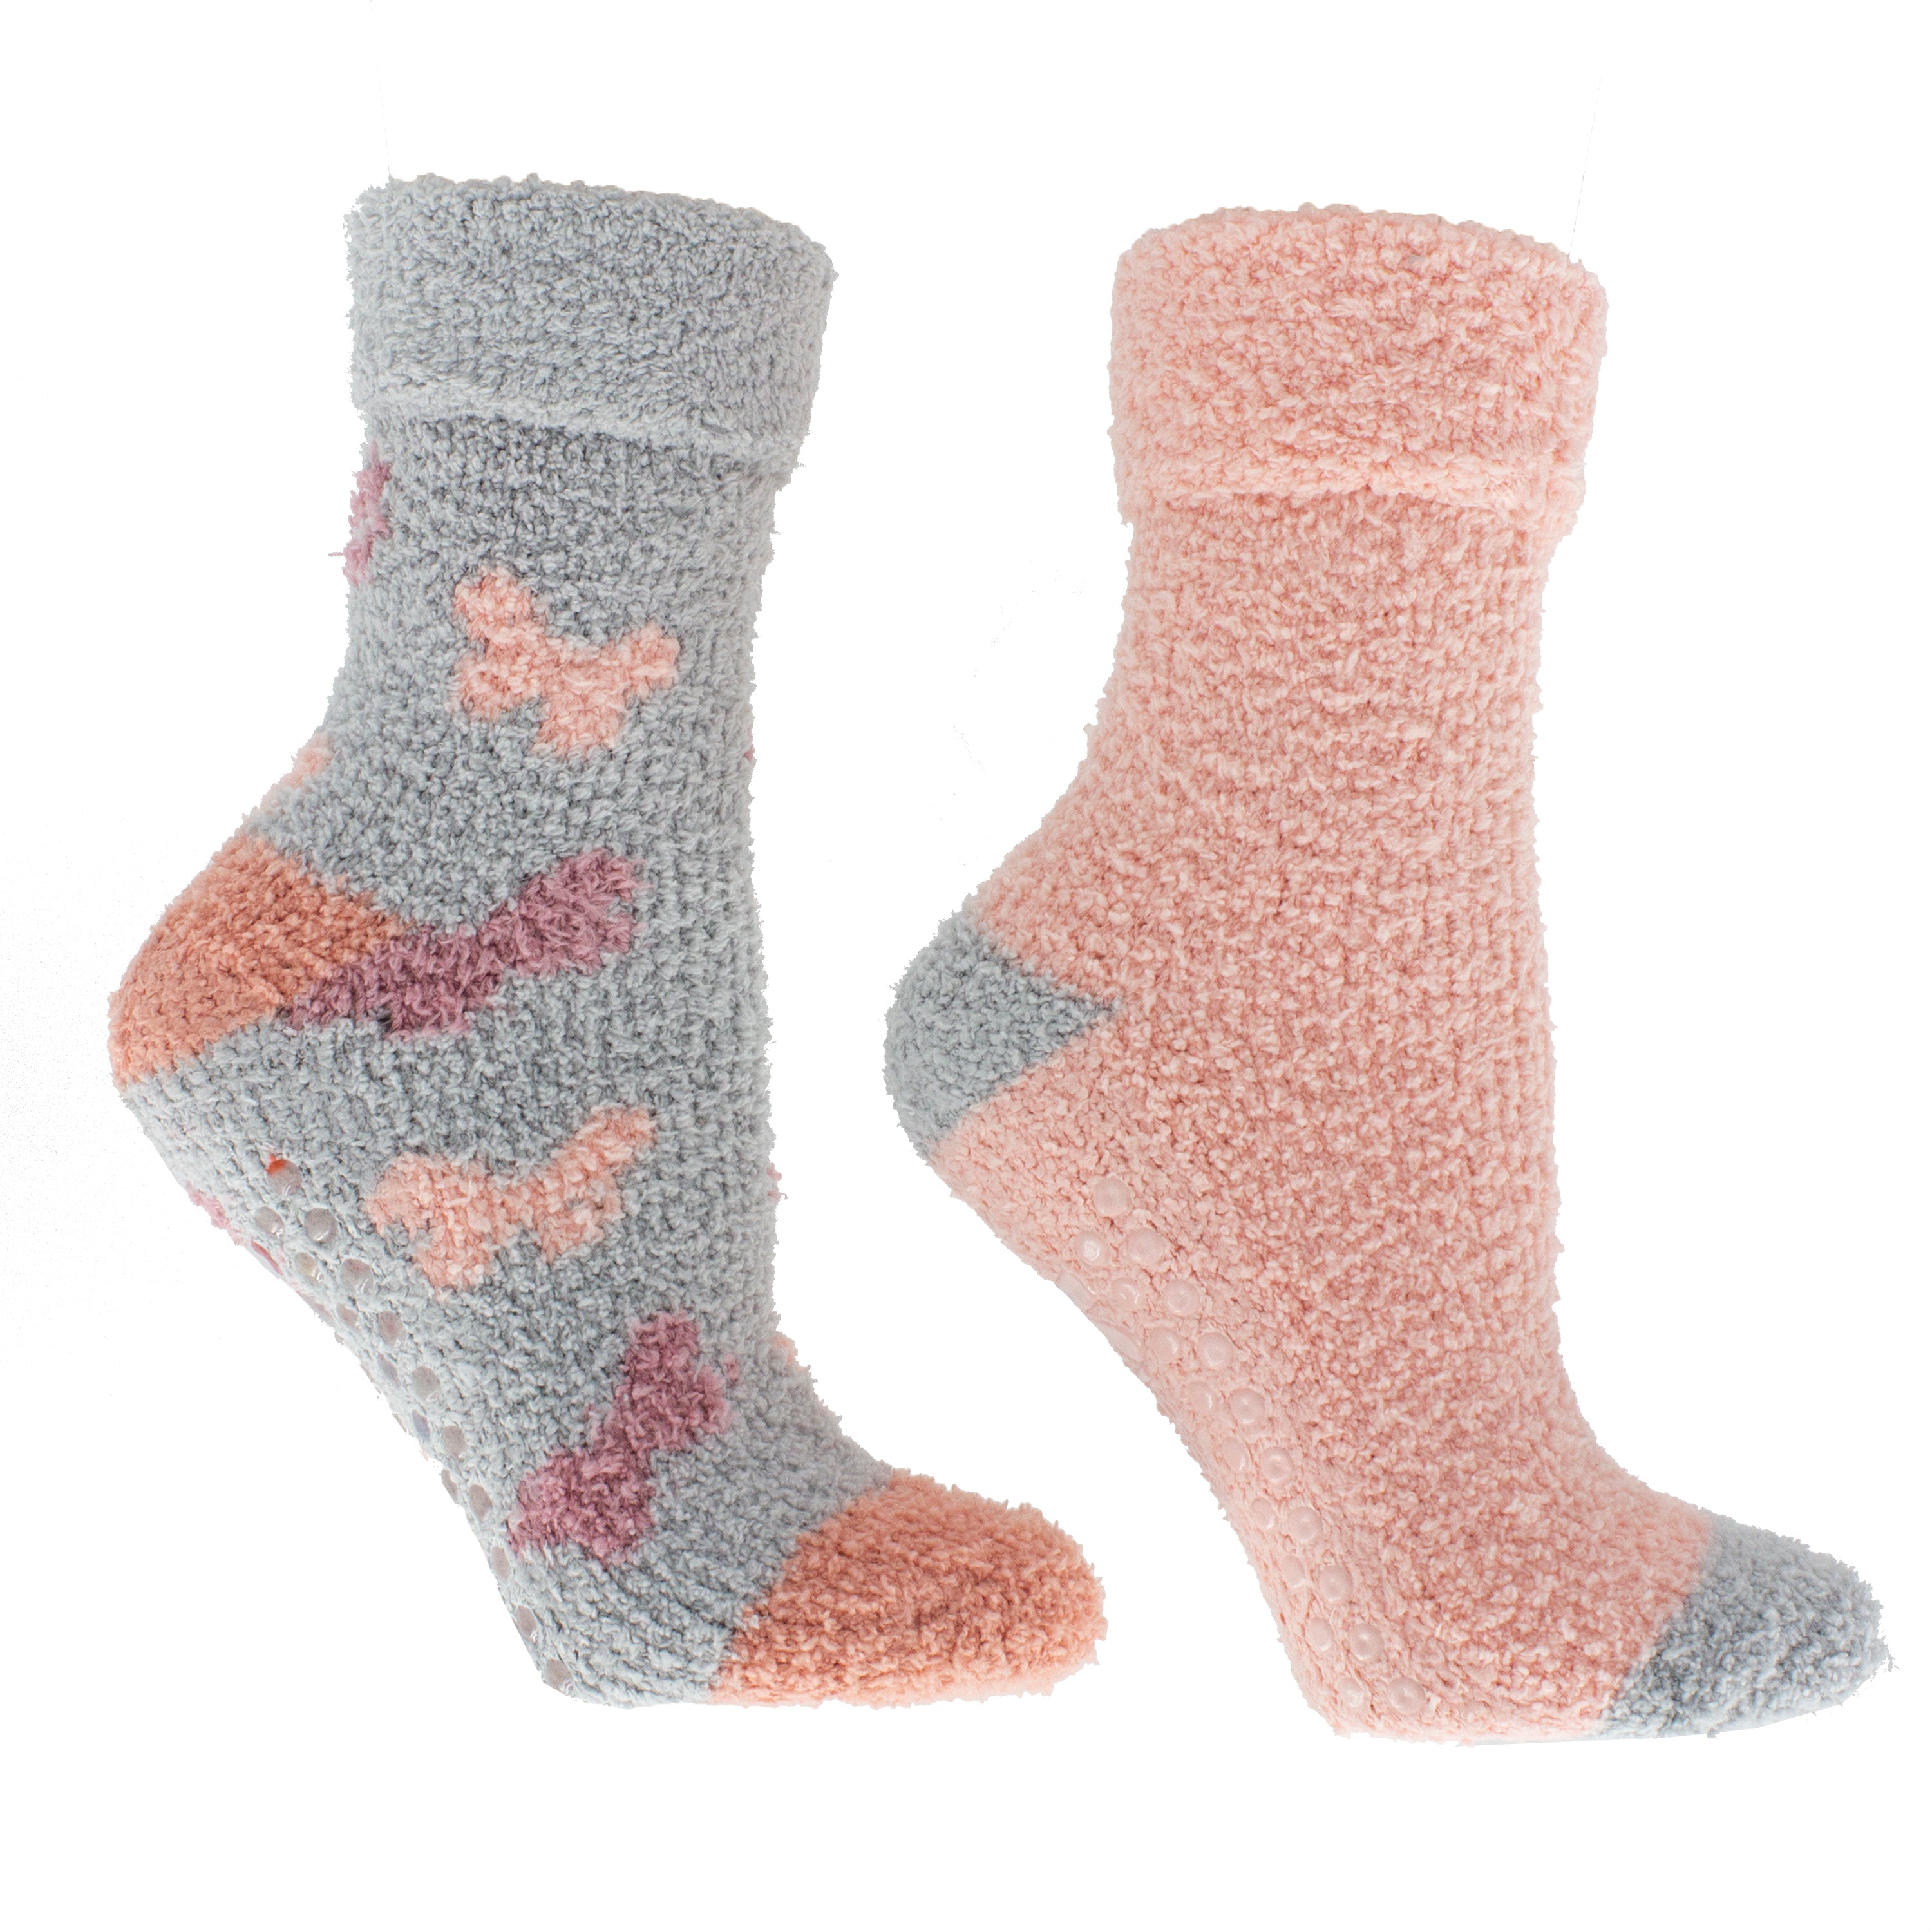 2 Pairs - Non-Skid Soft Fuzzy Rose and Shea Butter Infused Slipper Socks with Sachet Gift